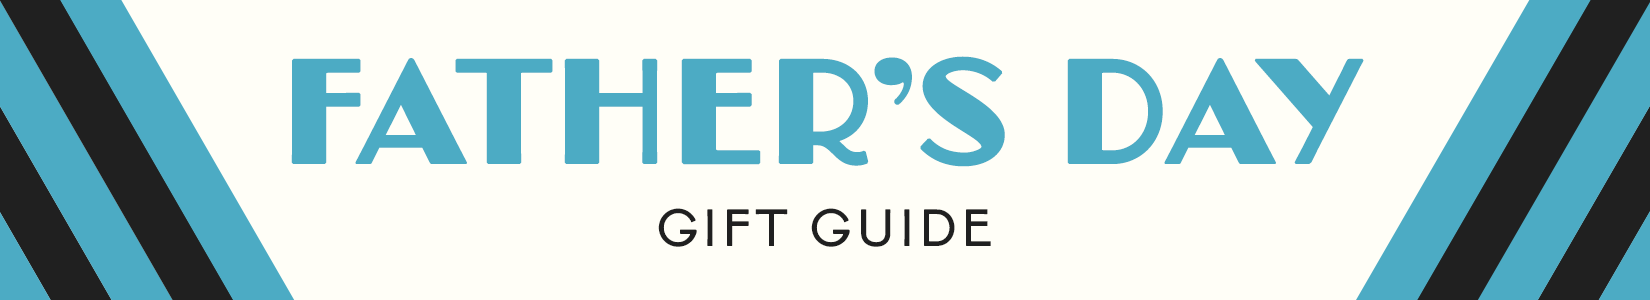 Father's Day Gift Guide banner